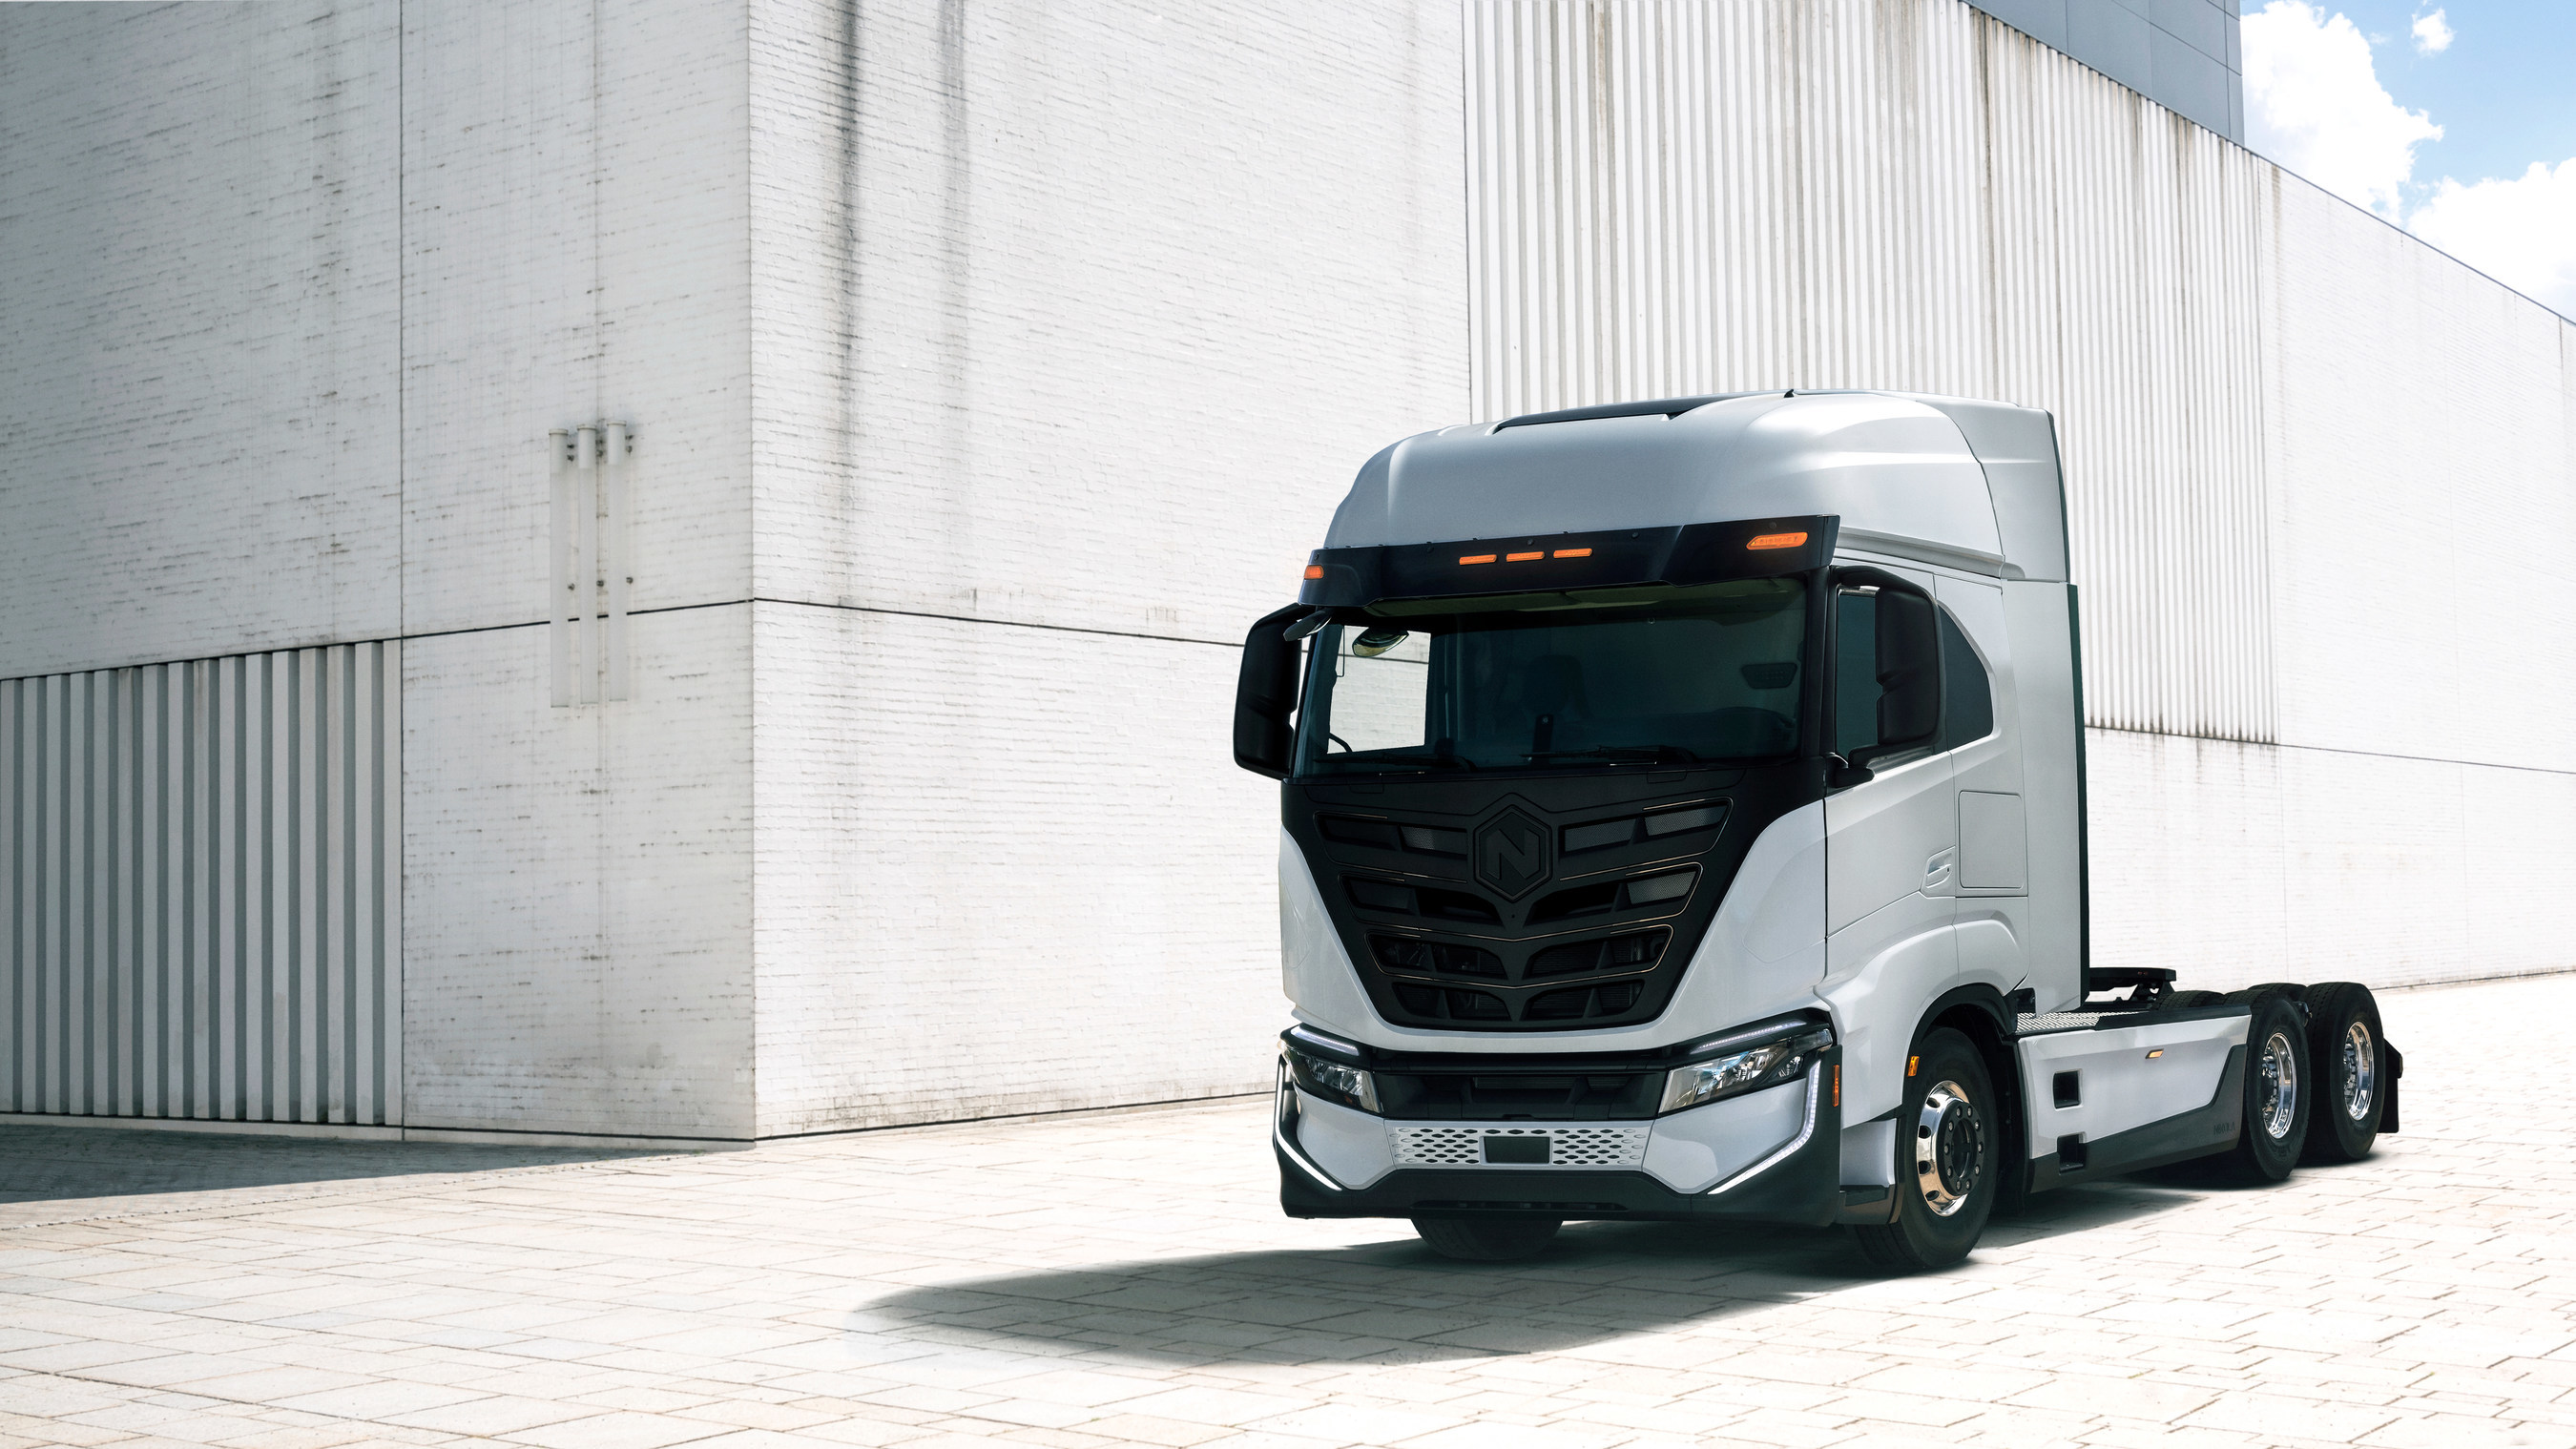 The first Nikola Tre BEV trucks produced in Ulm, Germany will be delivered to select customers in the United States in 2022. (PRNewsfoto/Nikola Corporation)